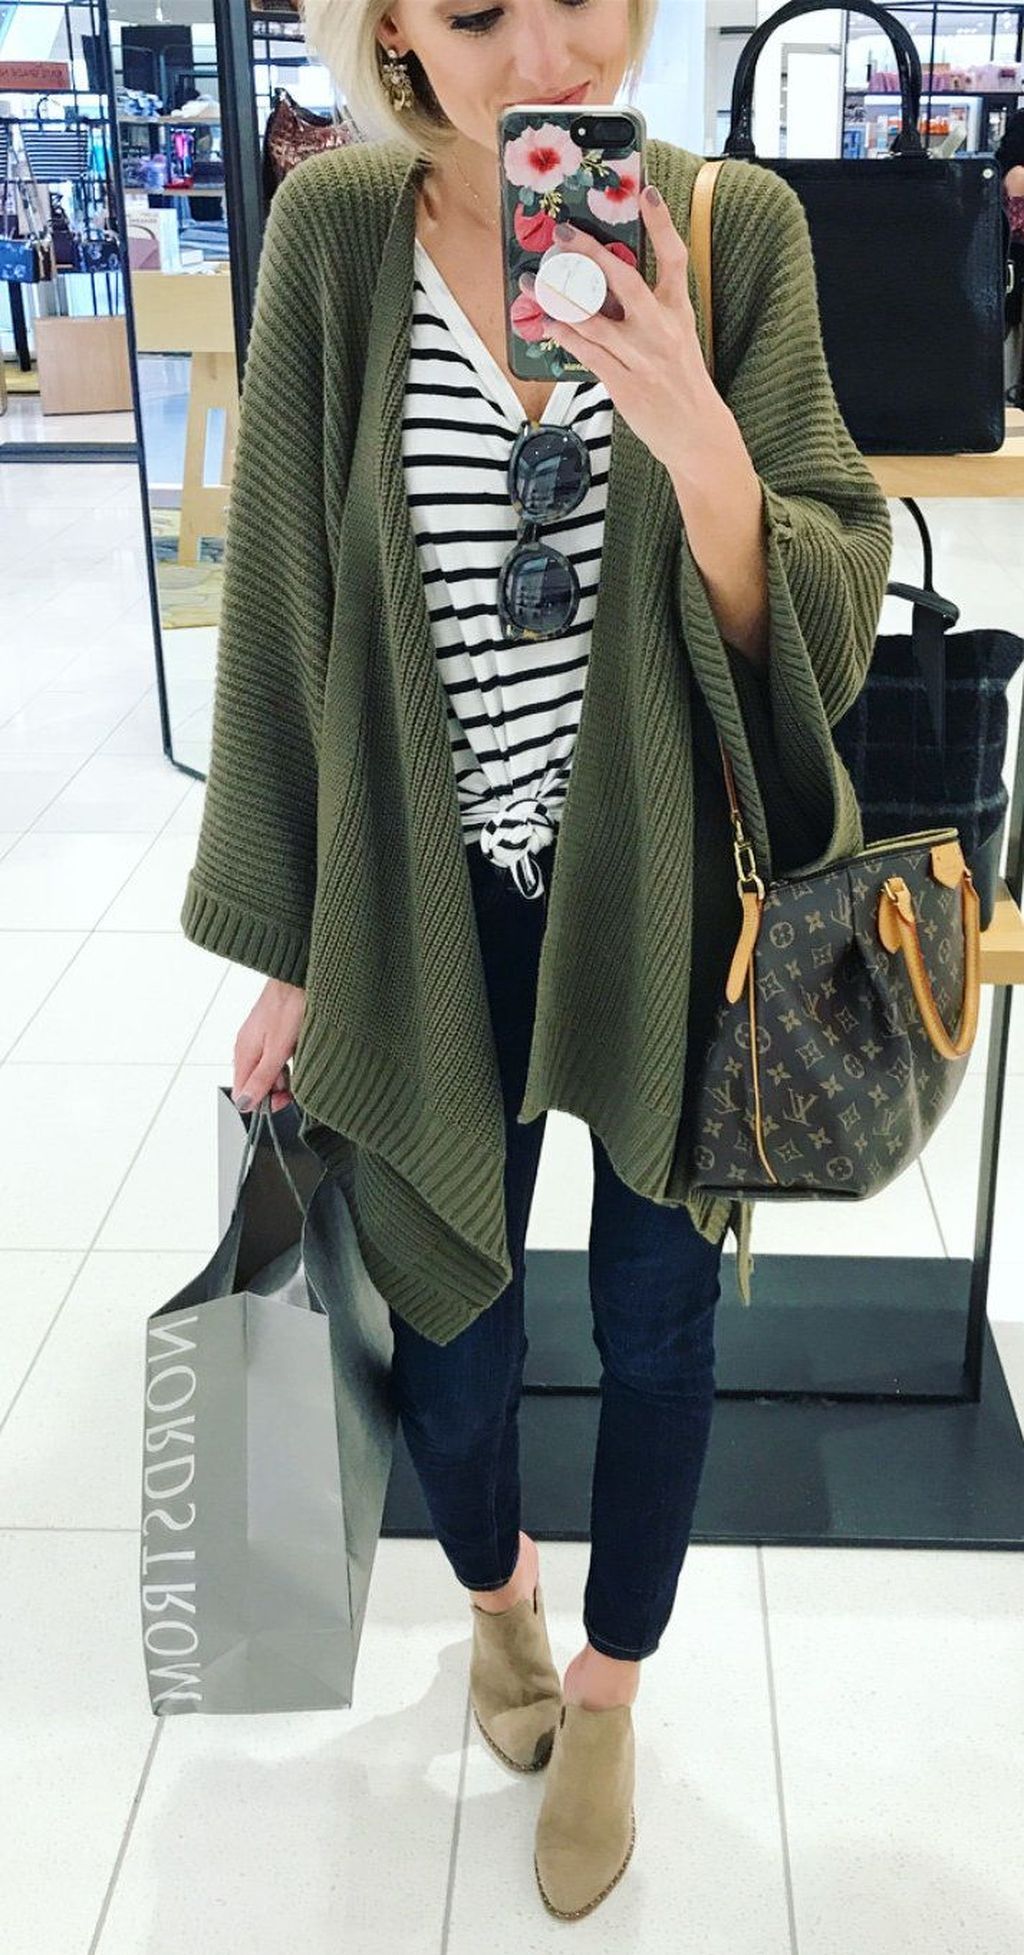 20+ Fashionable Cardigan Outfit Ideas For Women